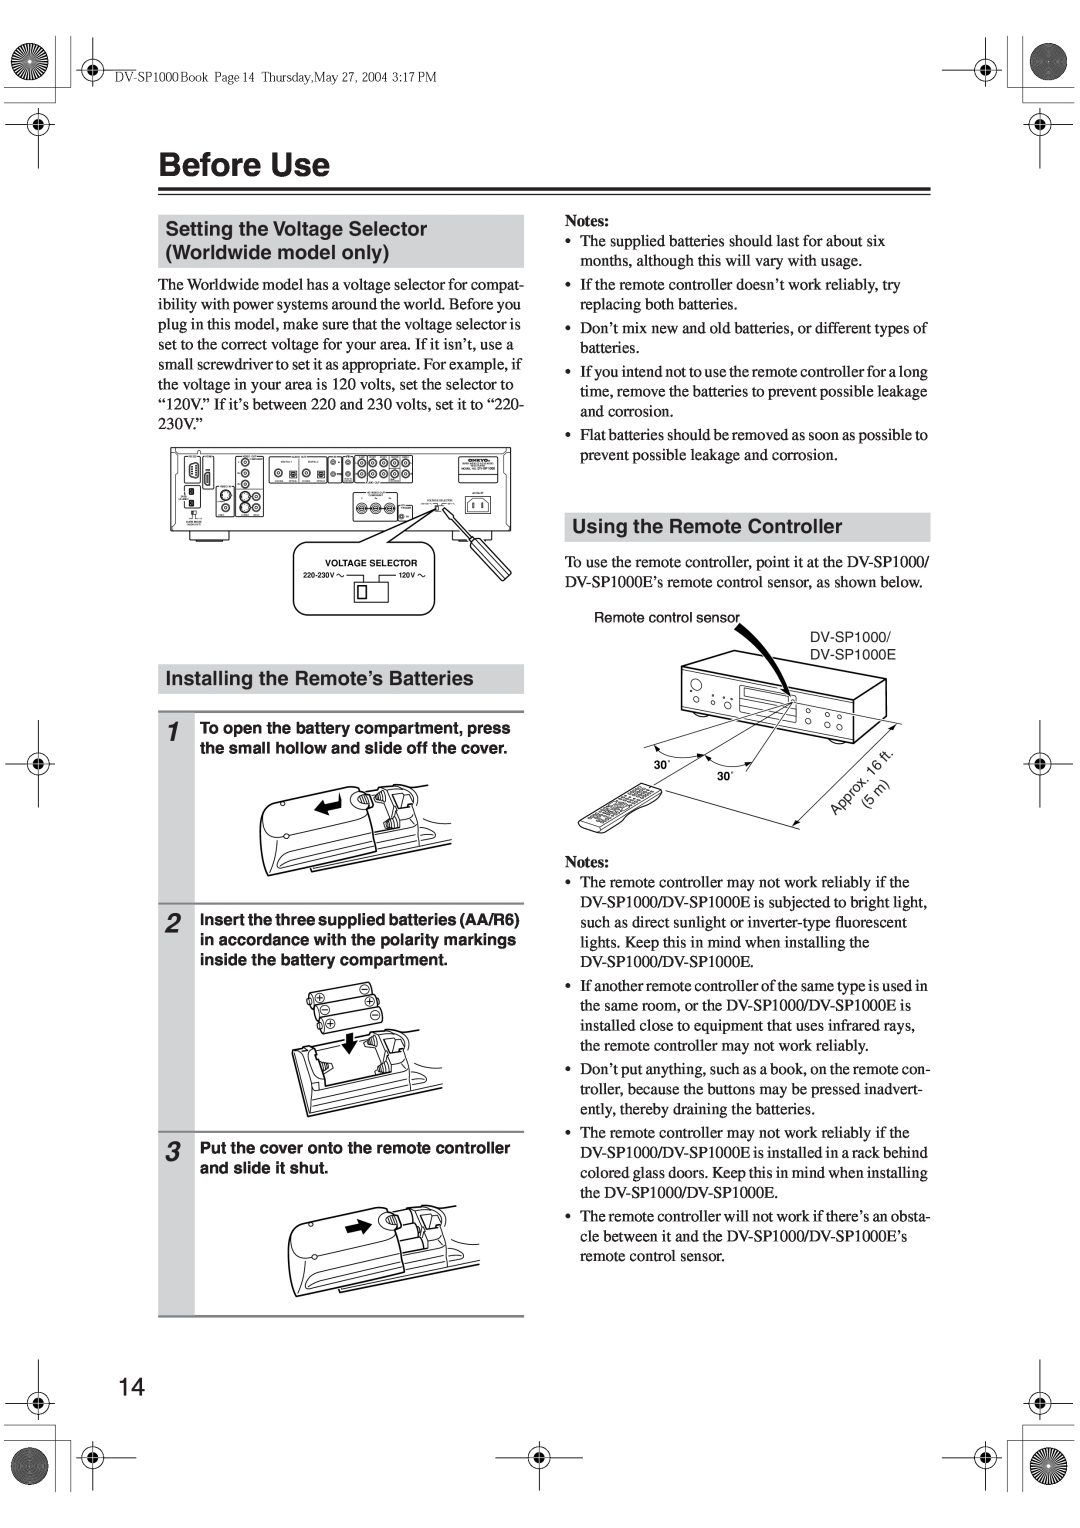 Onkyo DV-SP1000E instruction manual Before Use, Installing the Remote’s Batteries, Using the Remote Controller, Notes 